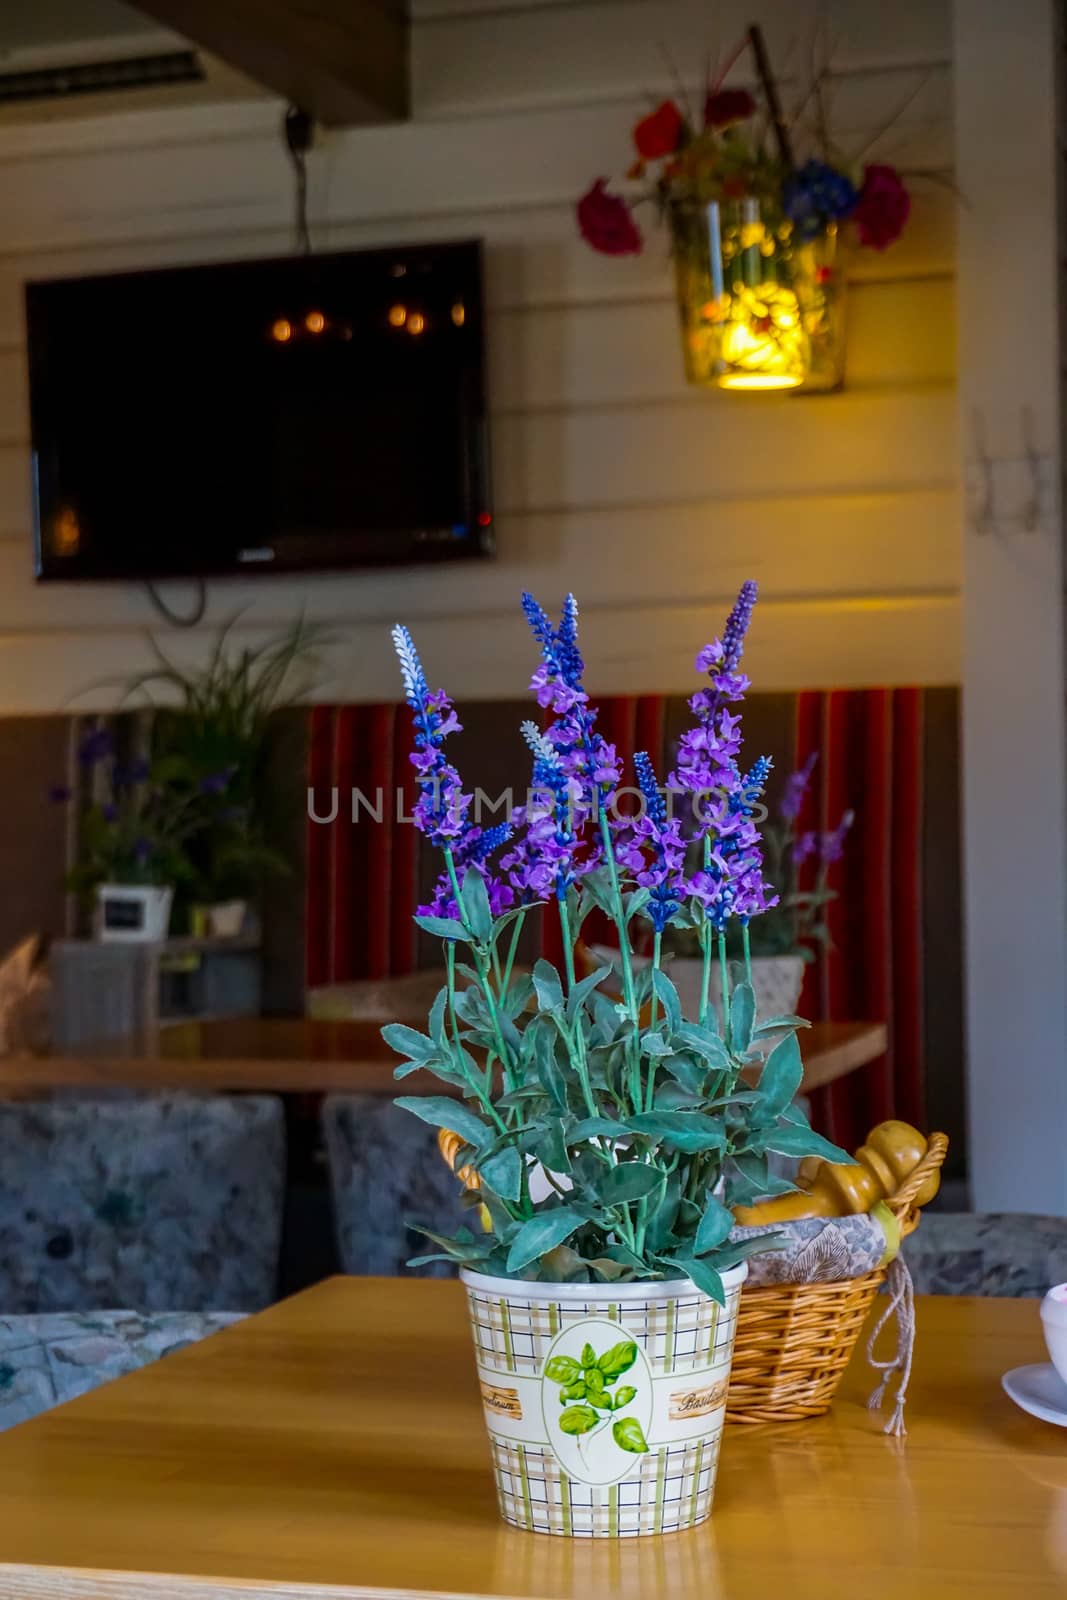 Flower decoration in cafe, Latvia. Flowers in a vase. Cafe interior with flowers. Flower vase decor on the table. 

